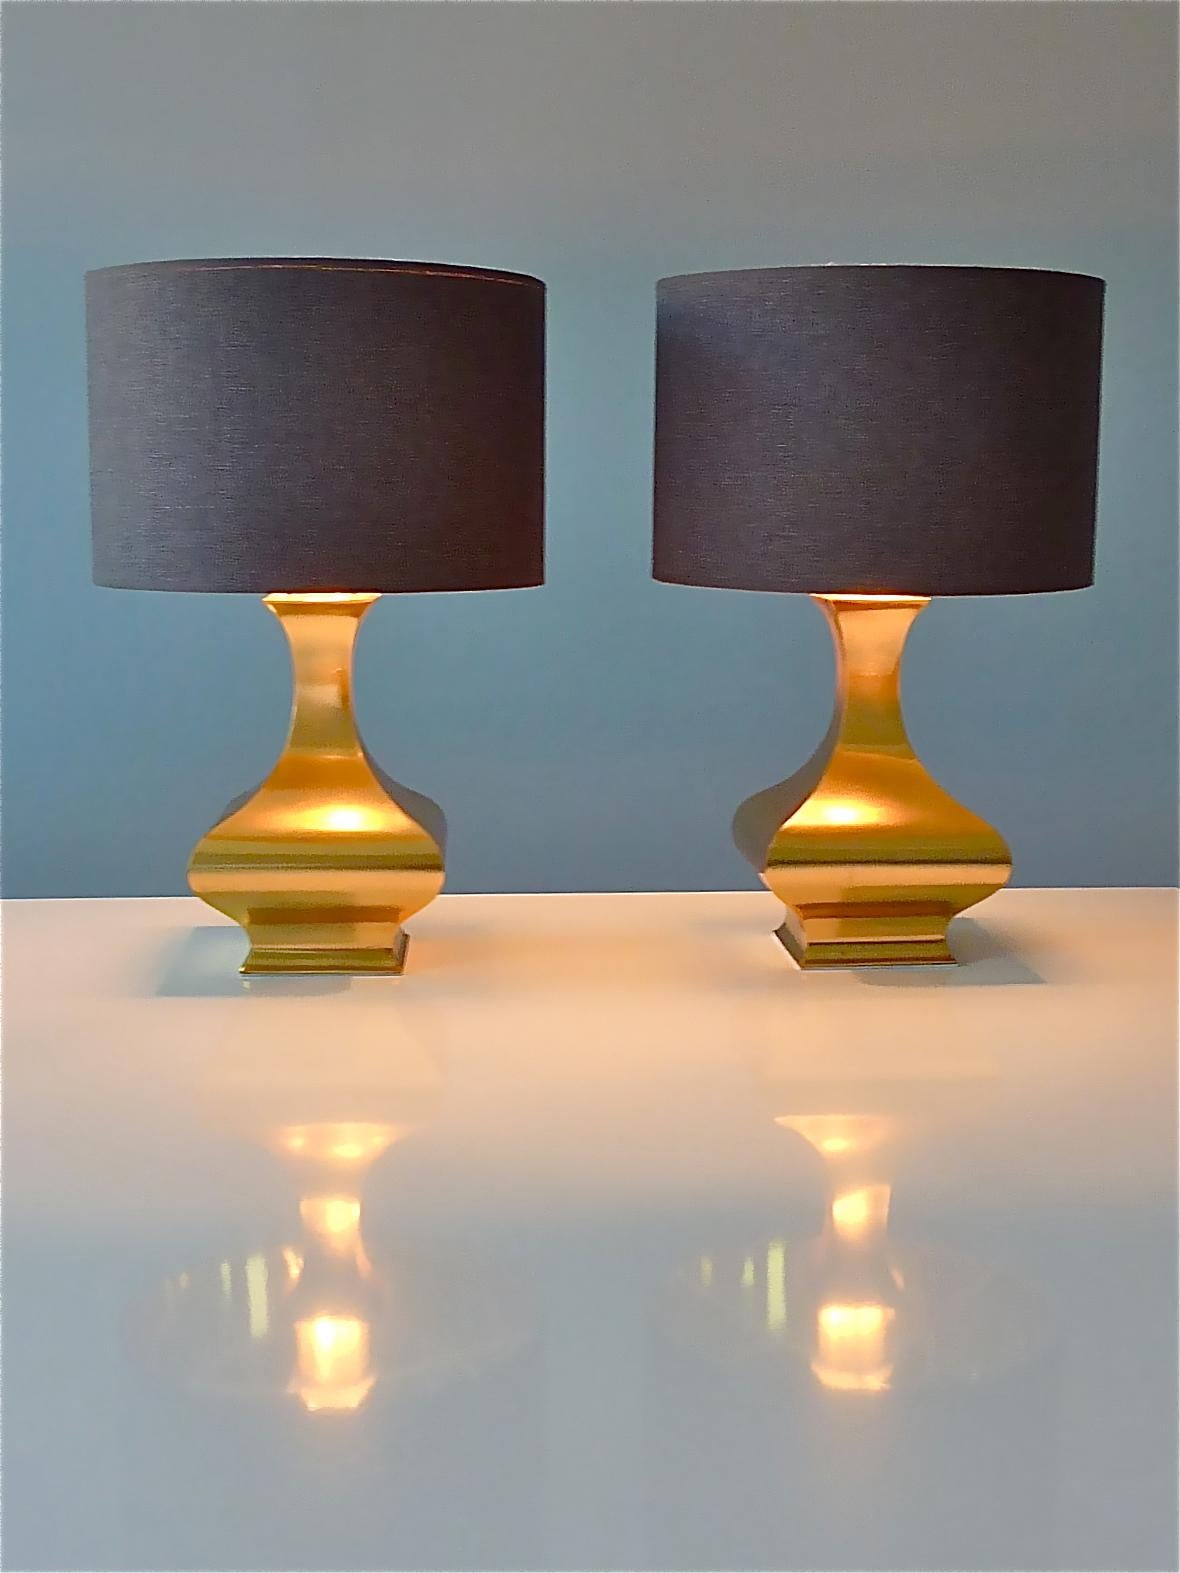 Rare Pair Maria Pergay Midcentury Table Lamps Gilt Brass Steel Metal France 1970 For Sale 11